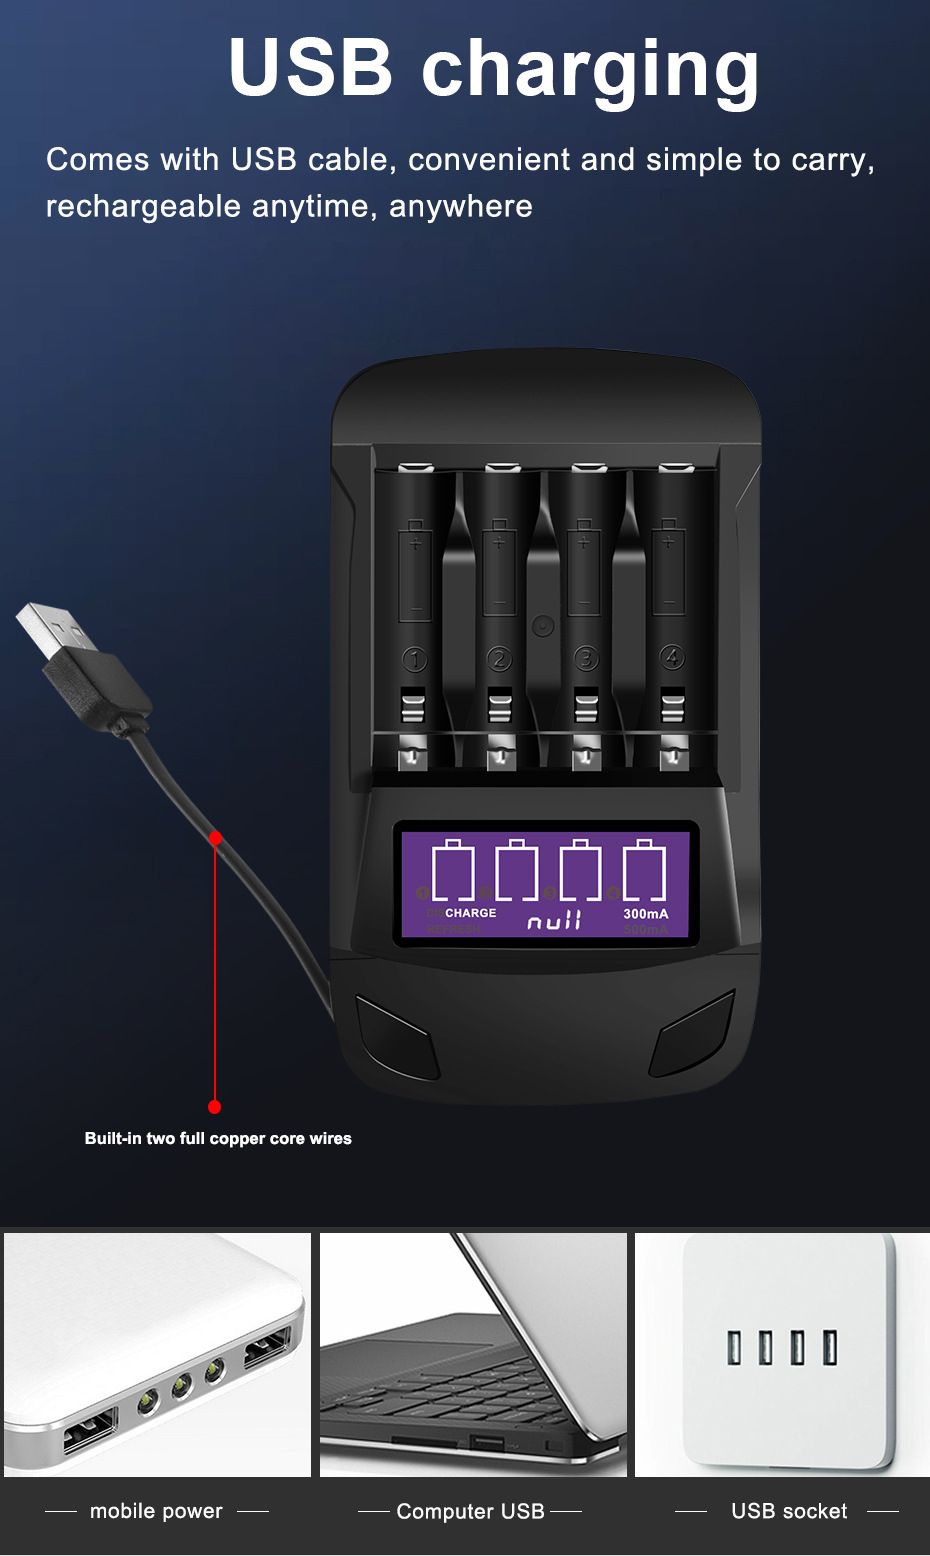 PALO-USB-Smart-Four-Slot-AAAAA-Battery-Charger-LCD-Multifunction-Discharge-Display-Voltage-Charging--1710176